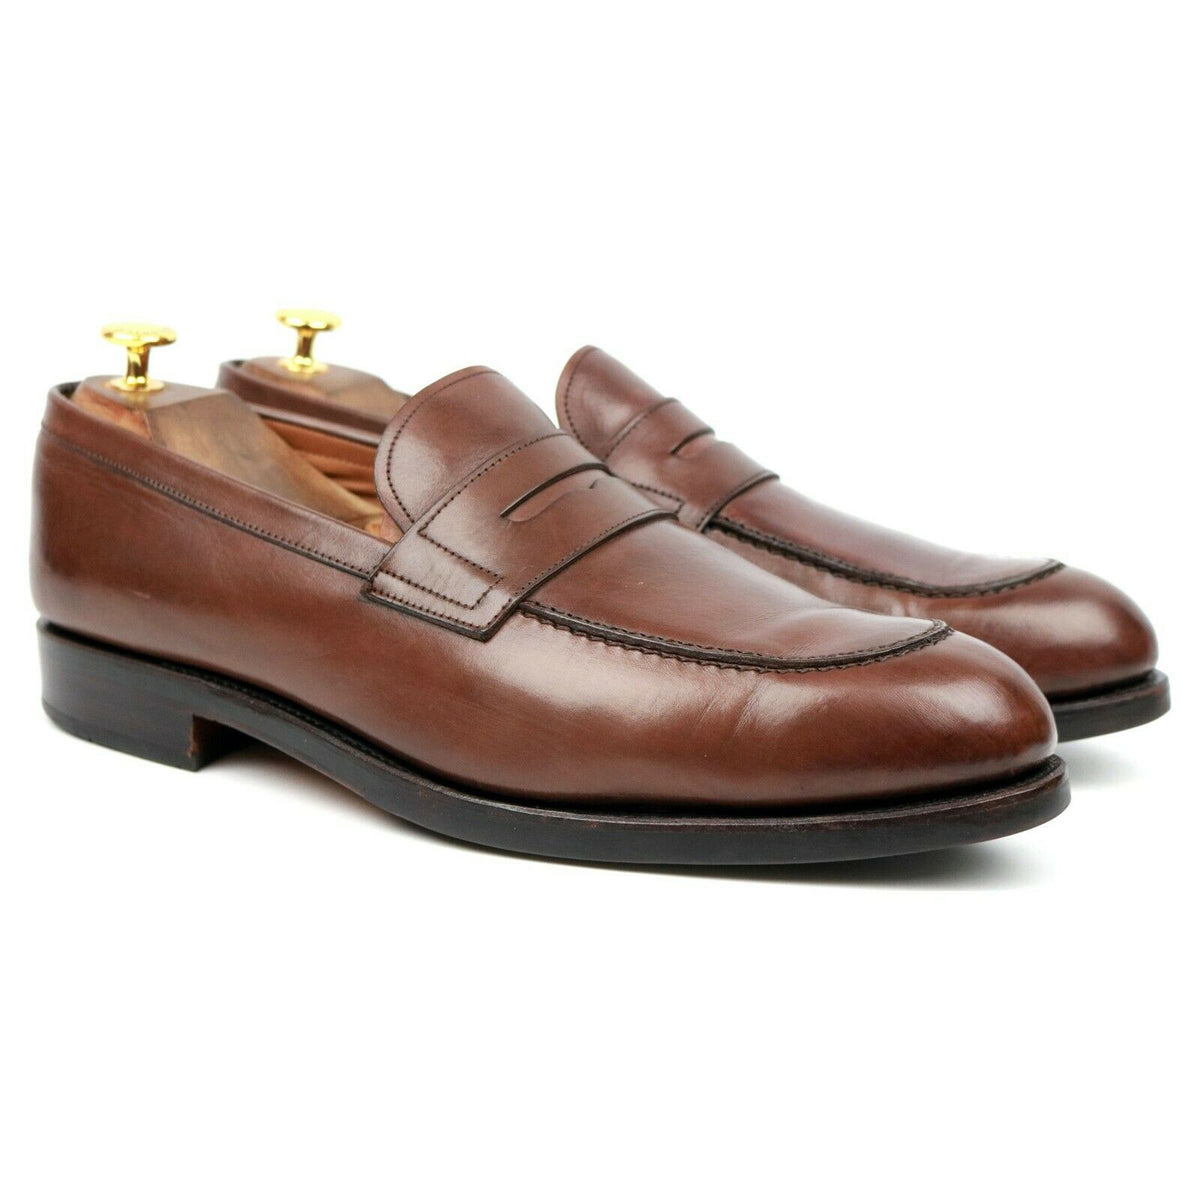 loafers uk